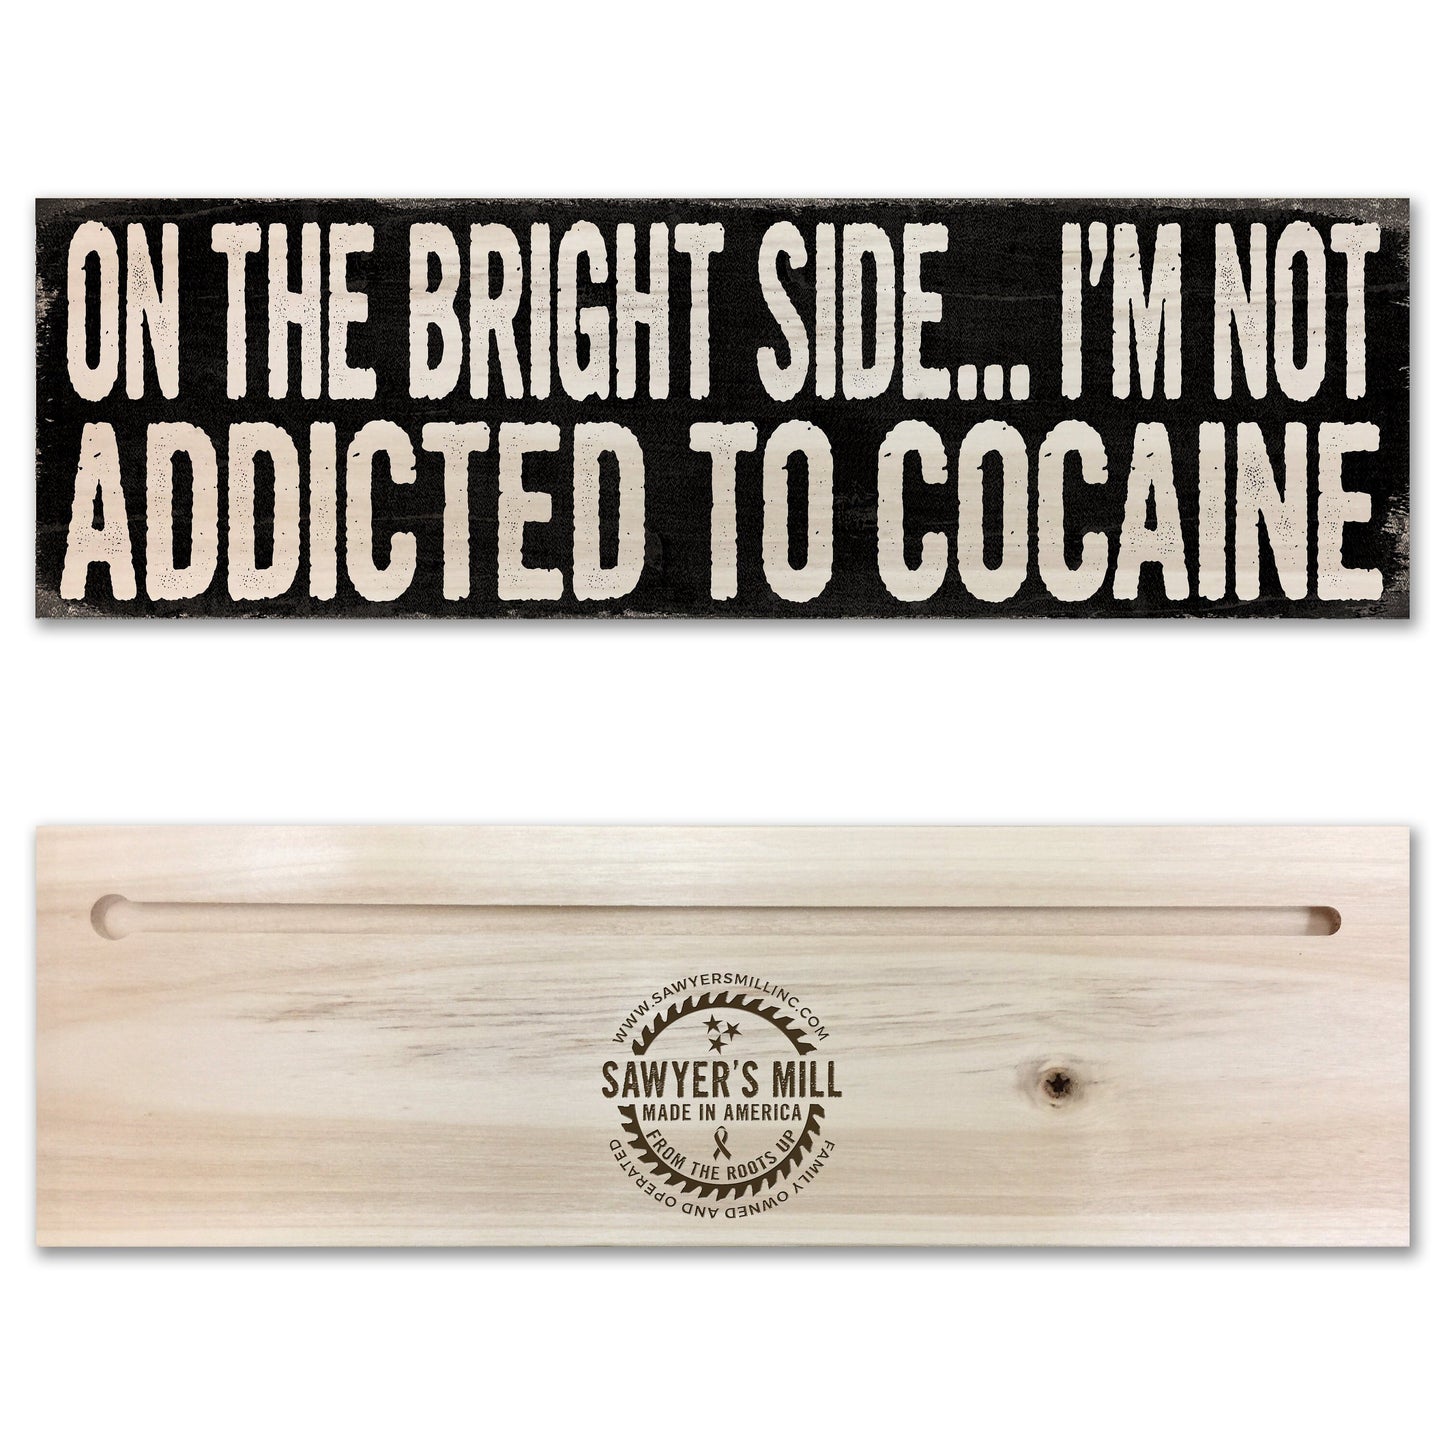 On The Bright Side... I'm Not Addicted To Cocaine.